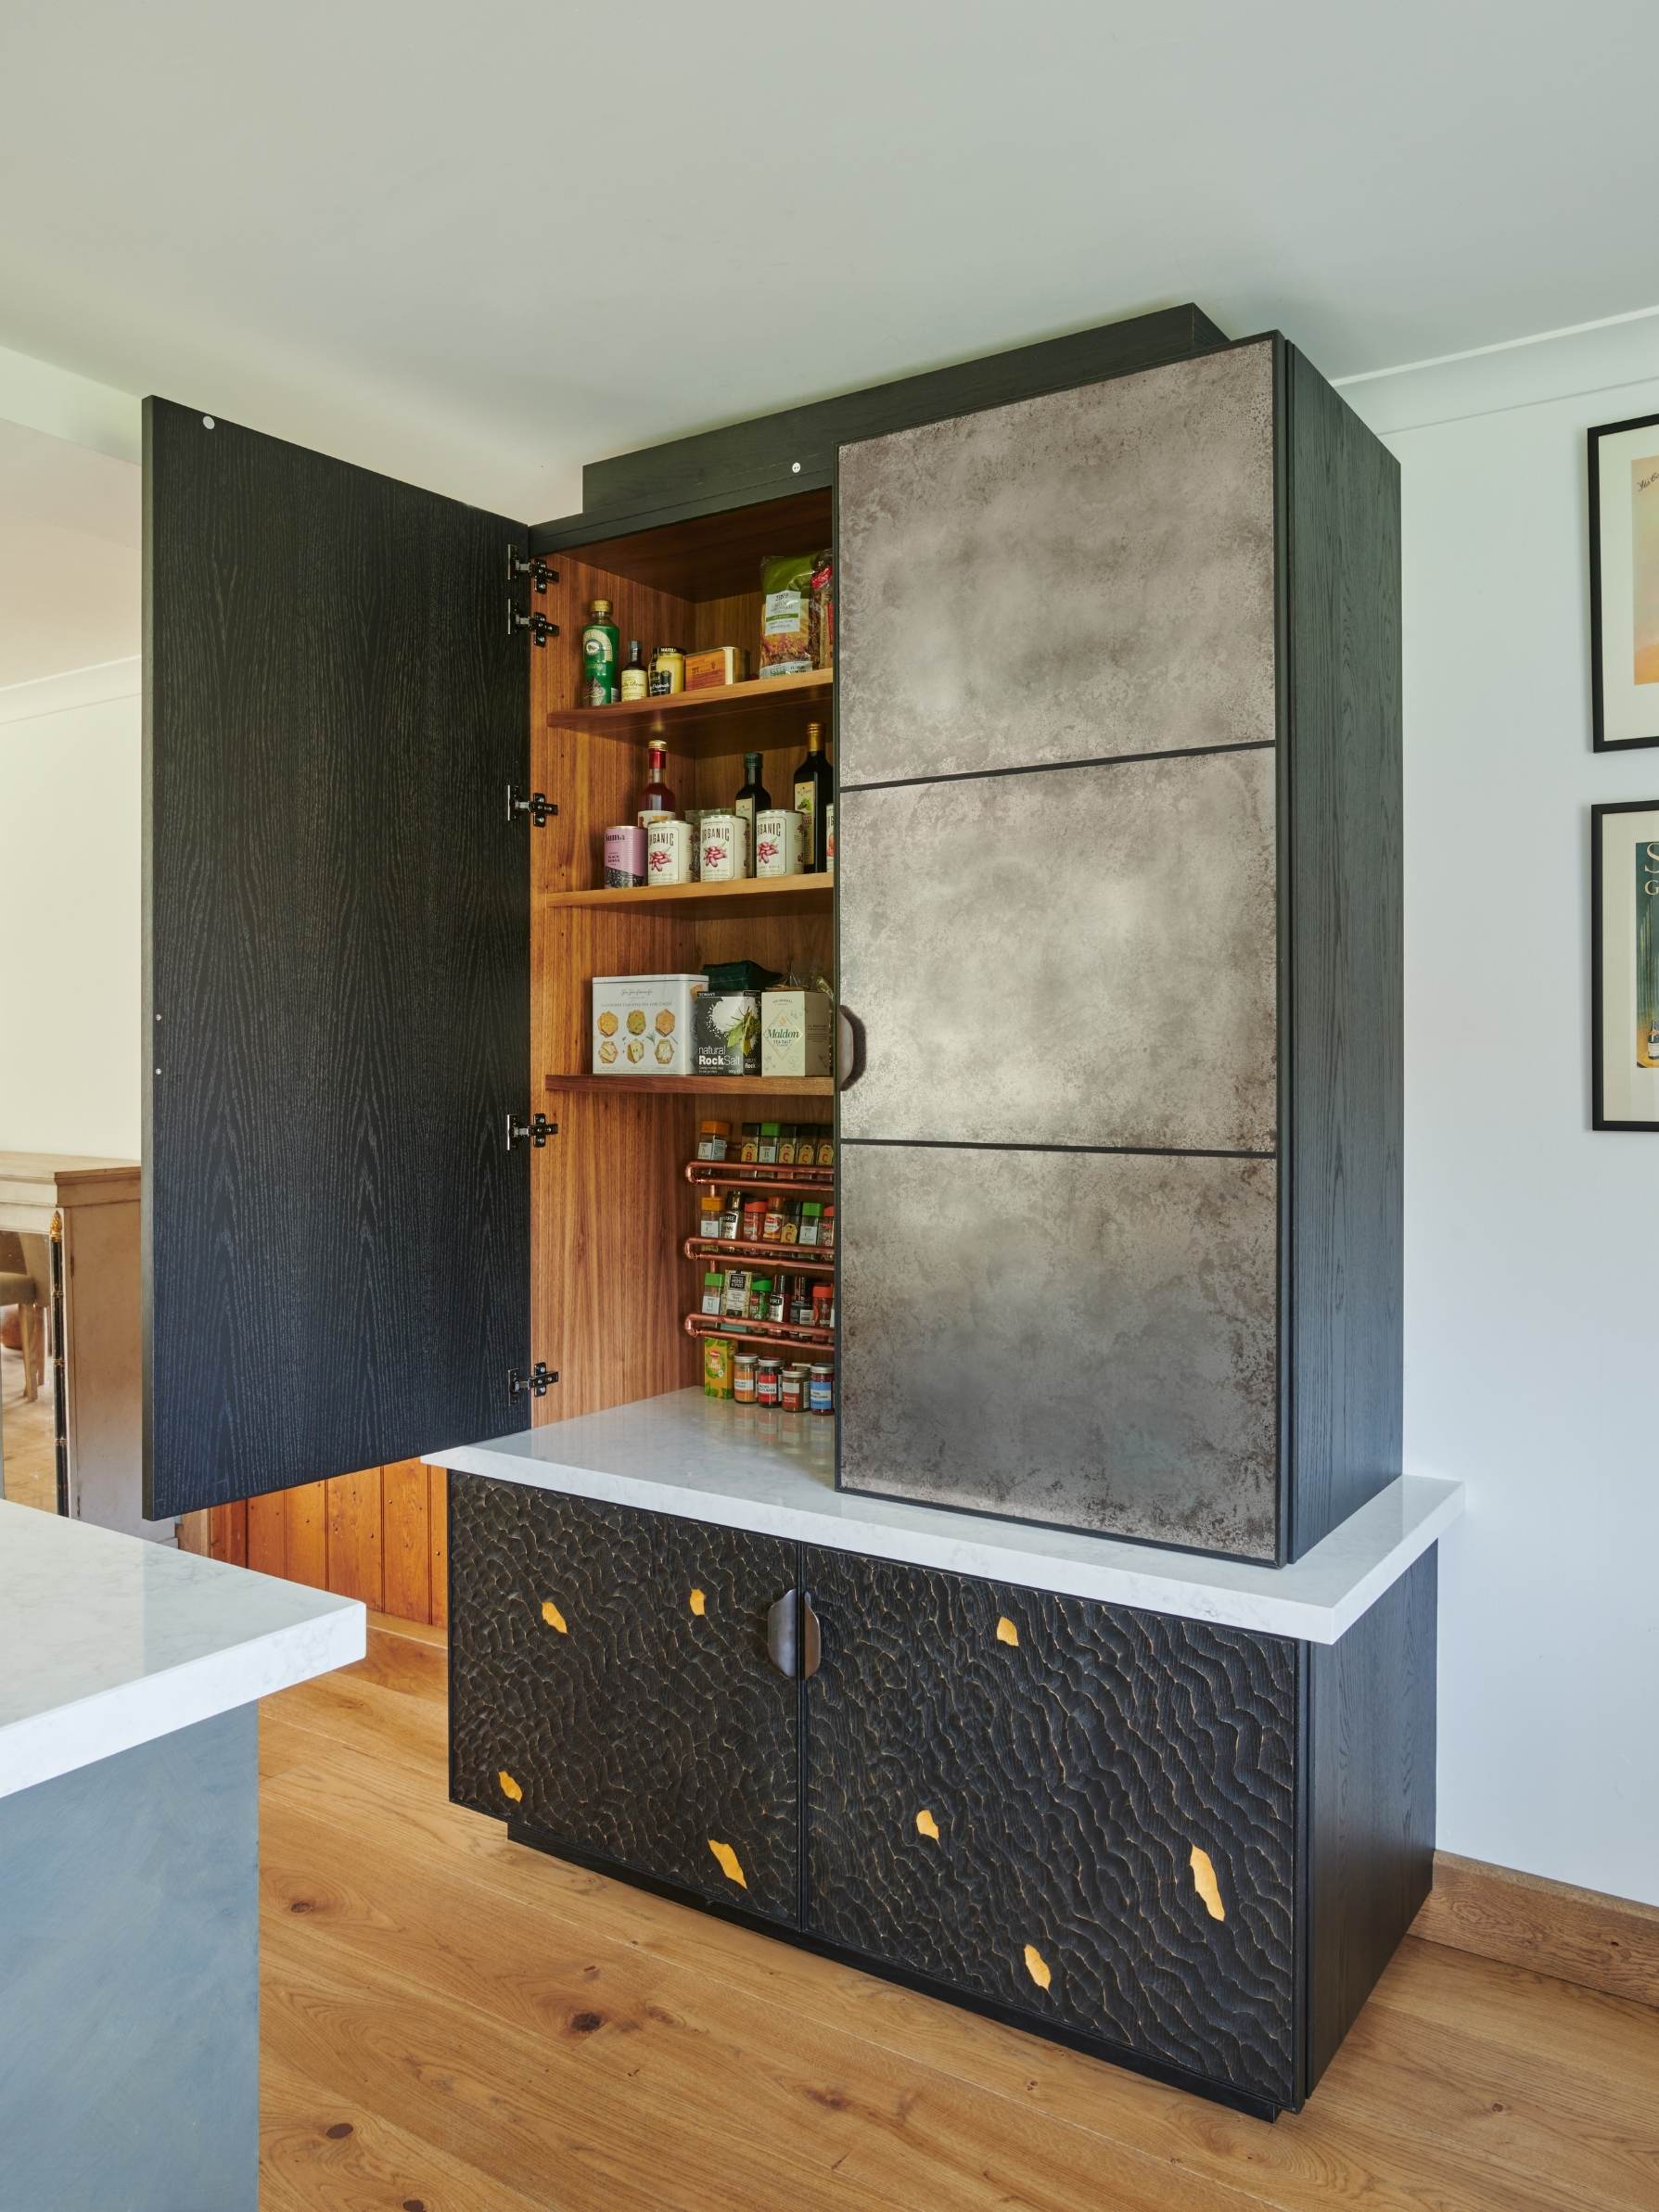 eclectic kitchen, A Dated Room Redesigned Into a Sociable Space for Serious Cooking